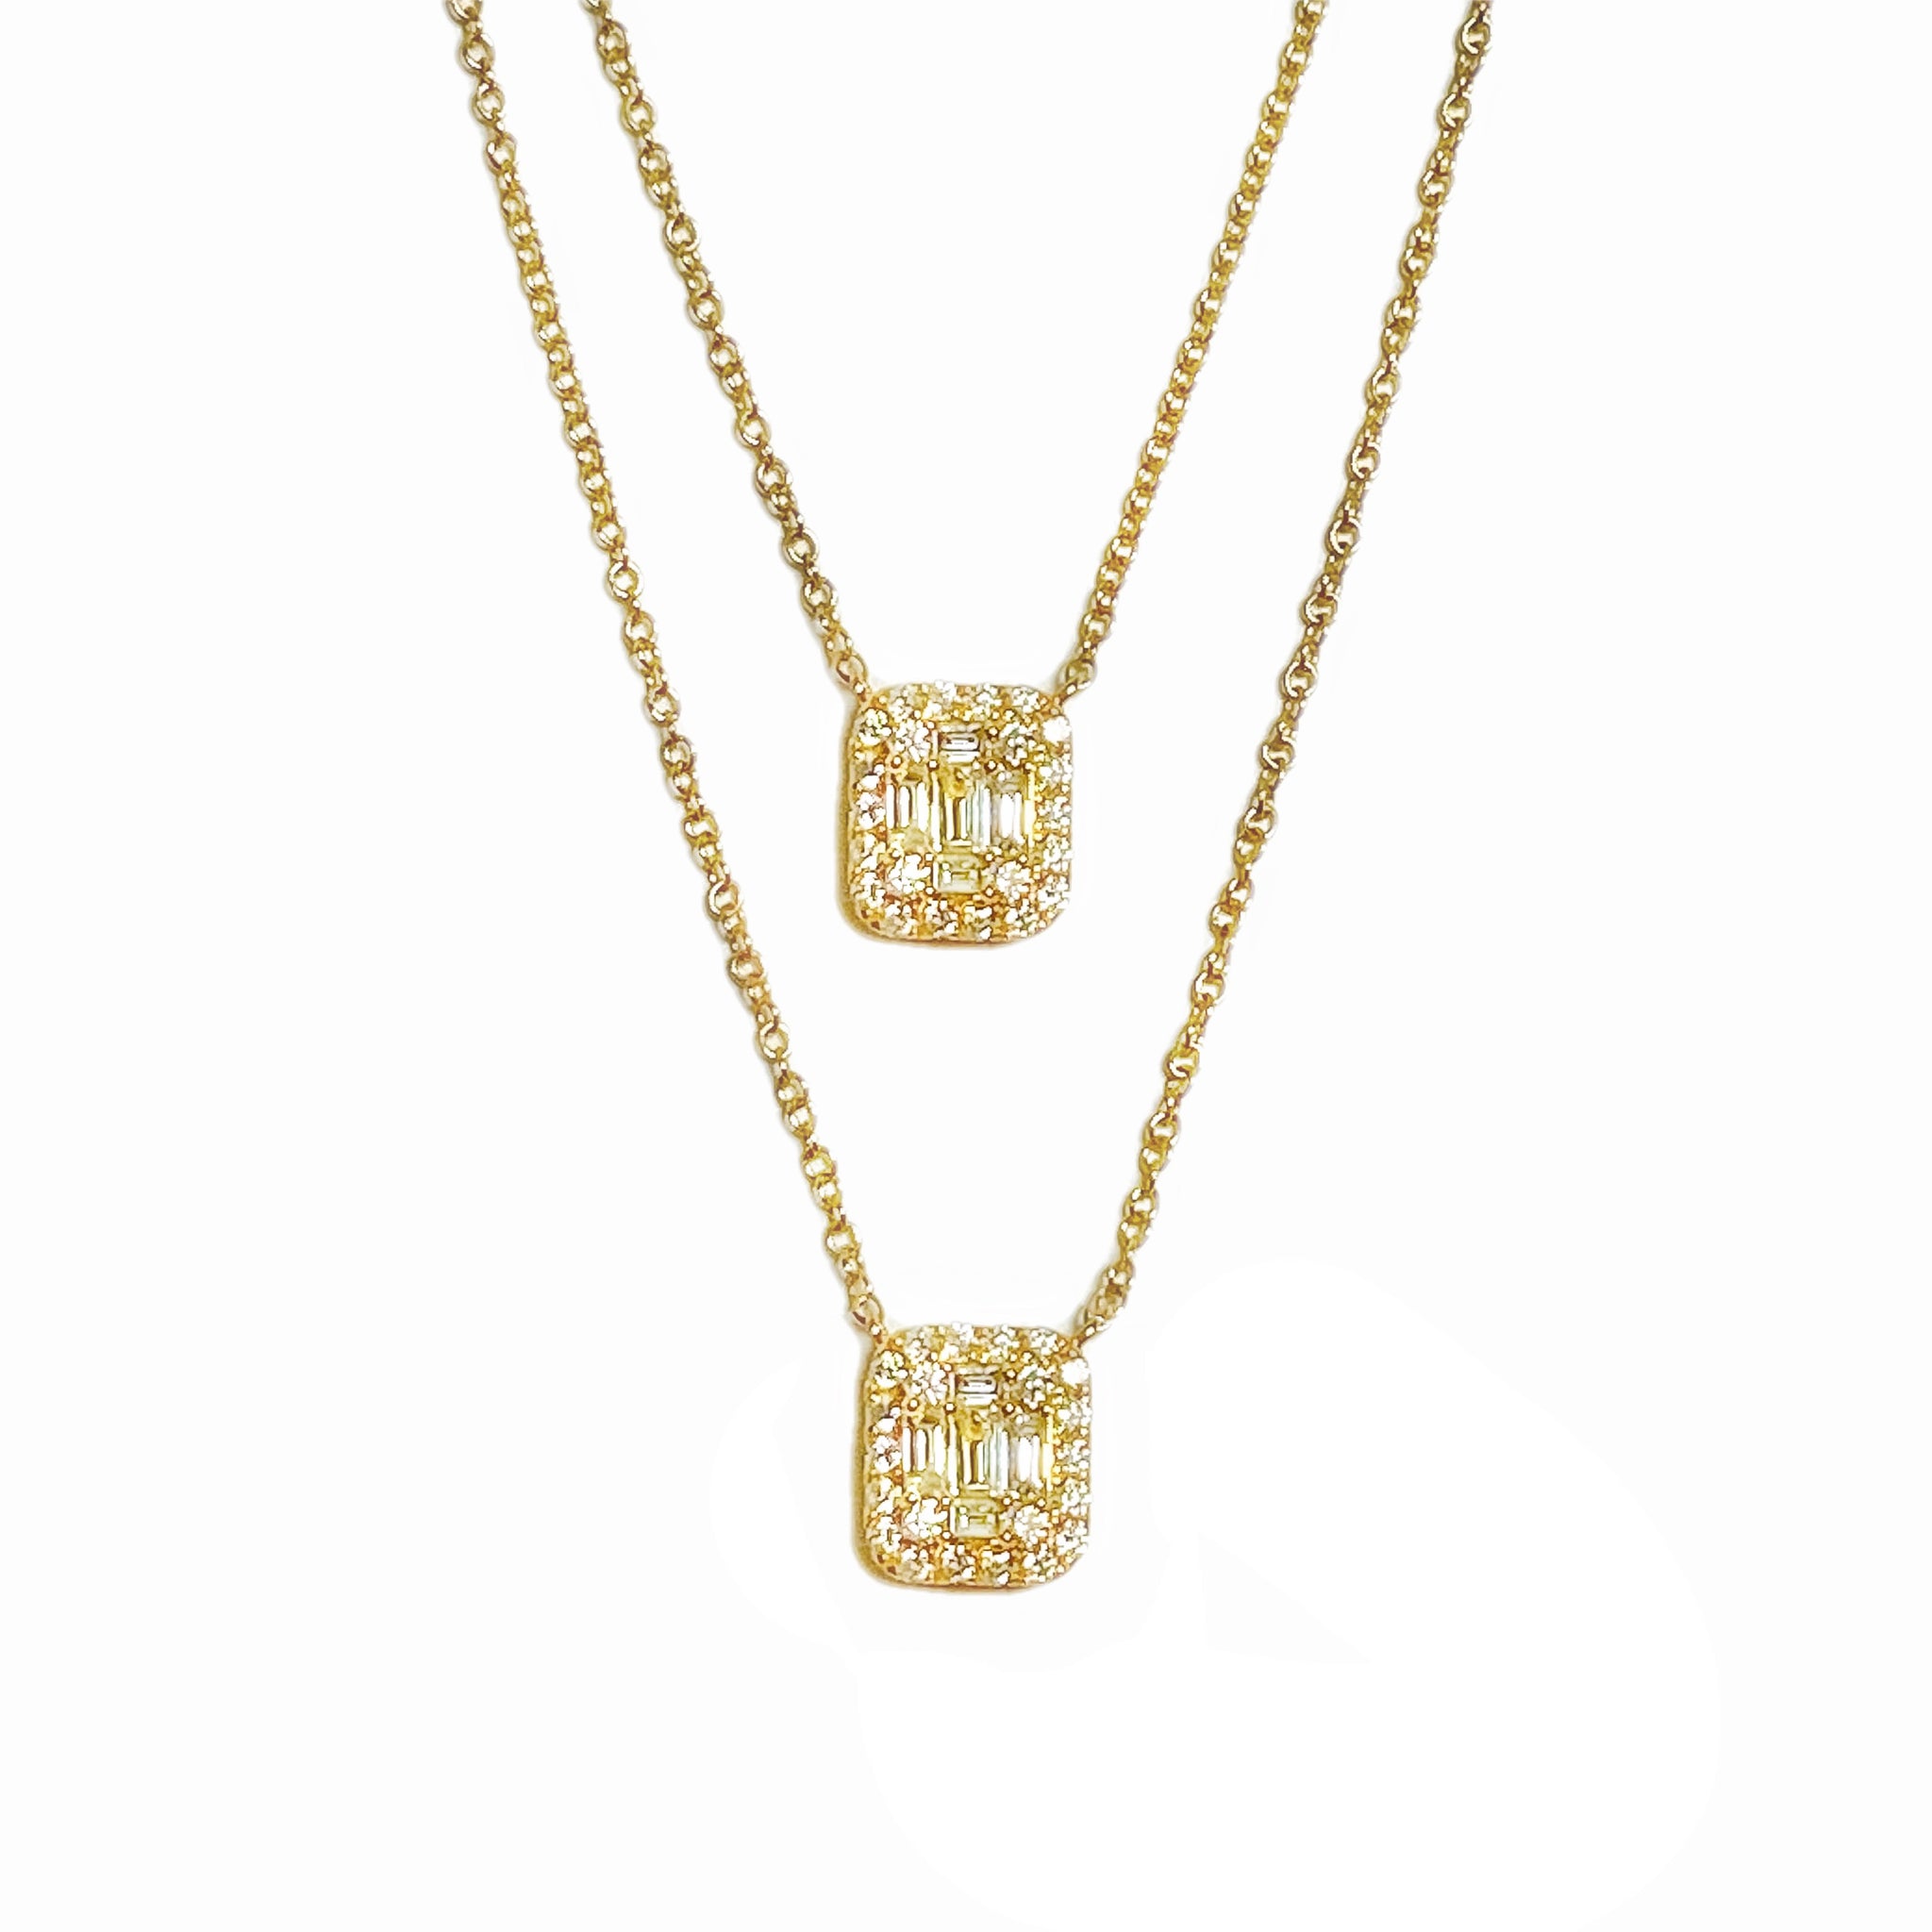 Gemtrends Double Baguette Diamond Necklace - Each pendant has 4 sparkling baguette diamonds surrounded by shimmering pave diamonds set in 18k yellow gold. The necklace gives the appearance of layering two pieces, but it's connected on the sides and has a single adjustable clasp. Just stunning.  • 18k gold, .62 tcw diamond  • 14" - 16" L adjustable  • Lobster clasp - Available at Shaylula Jewlery & Gifts in Tarrytown, NY and online.